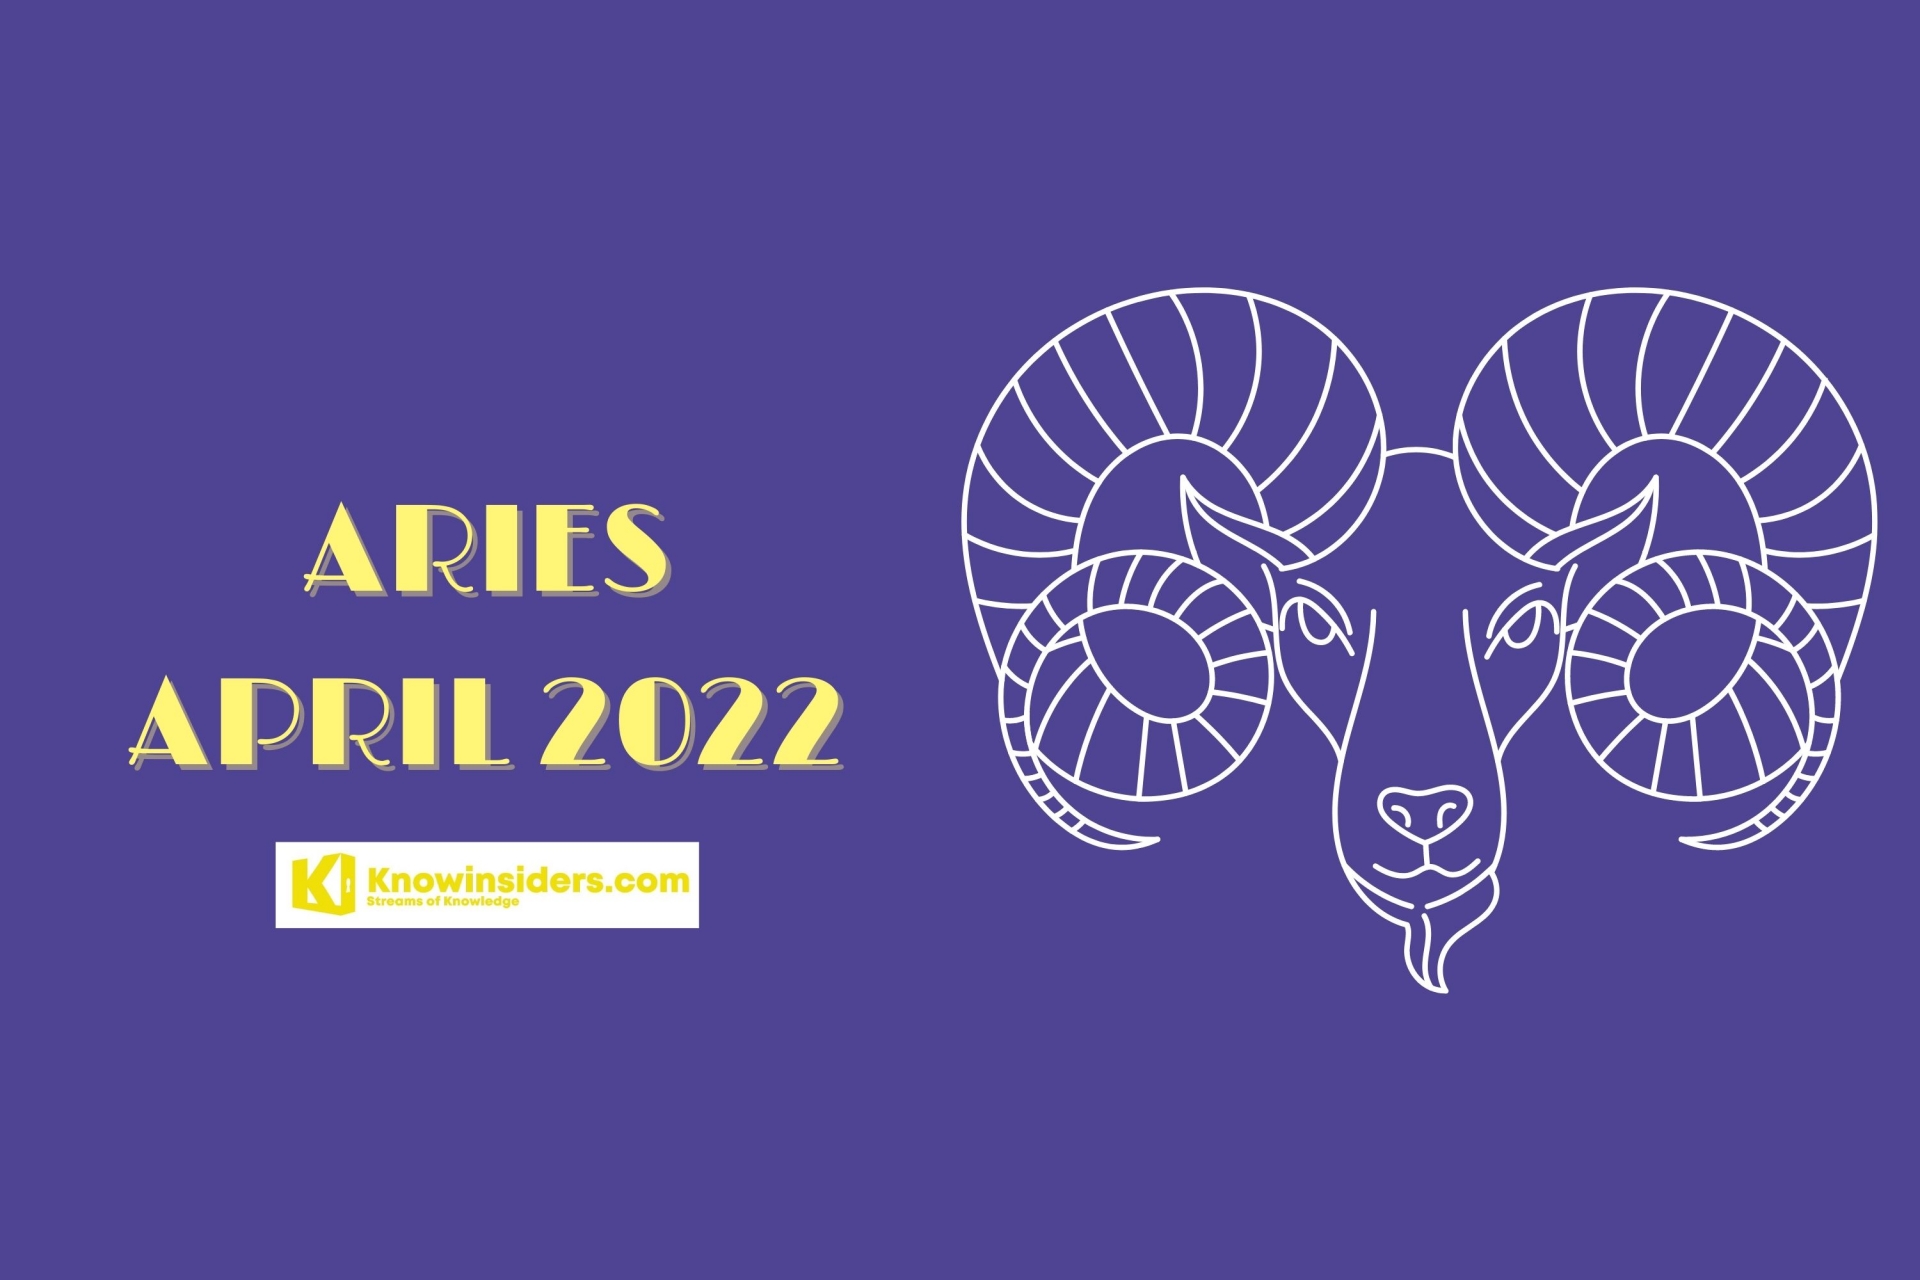 ARIES April 2022 Horoscope: Monthly Prediction for Love, Career, Money and Health